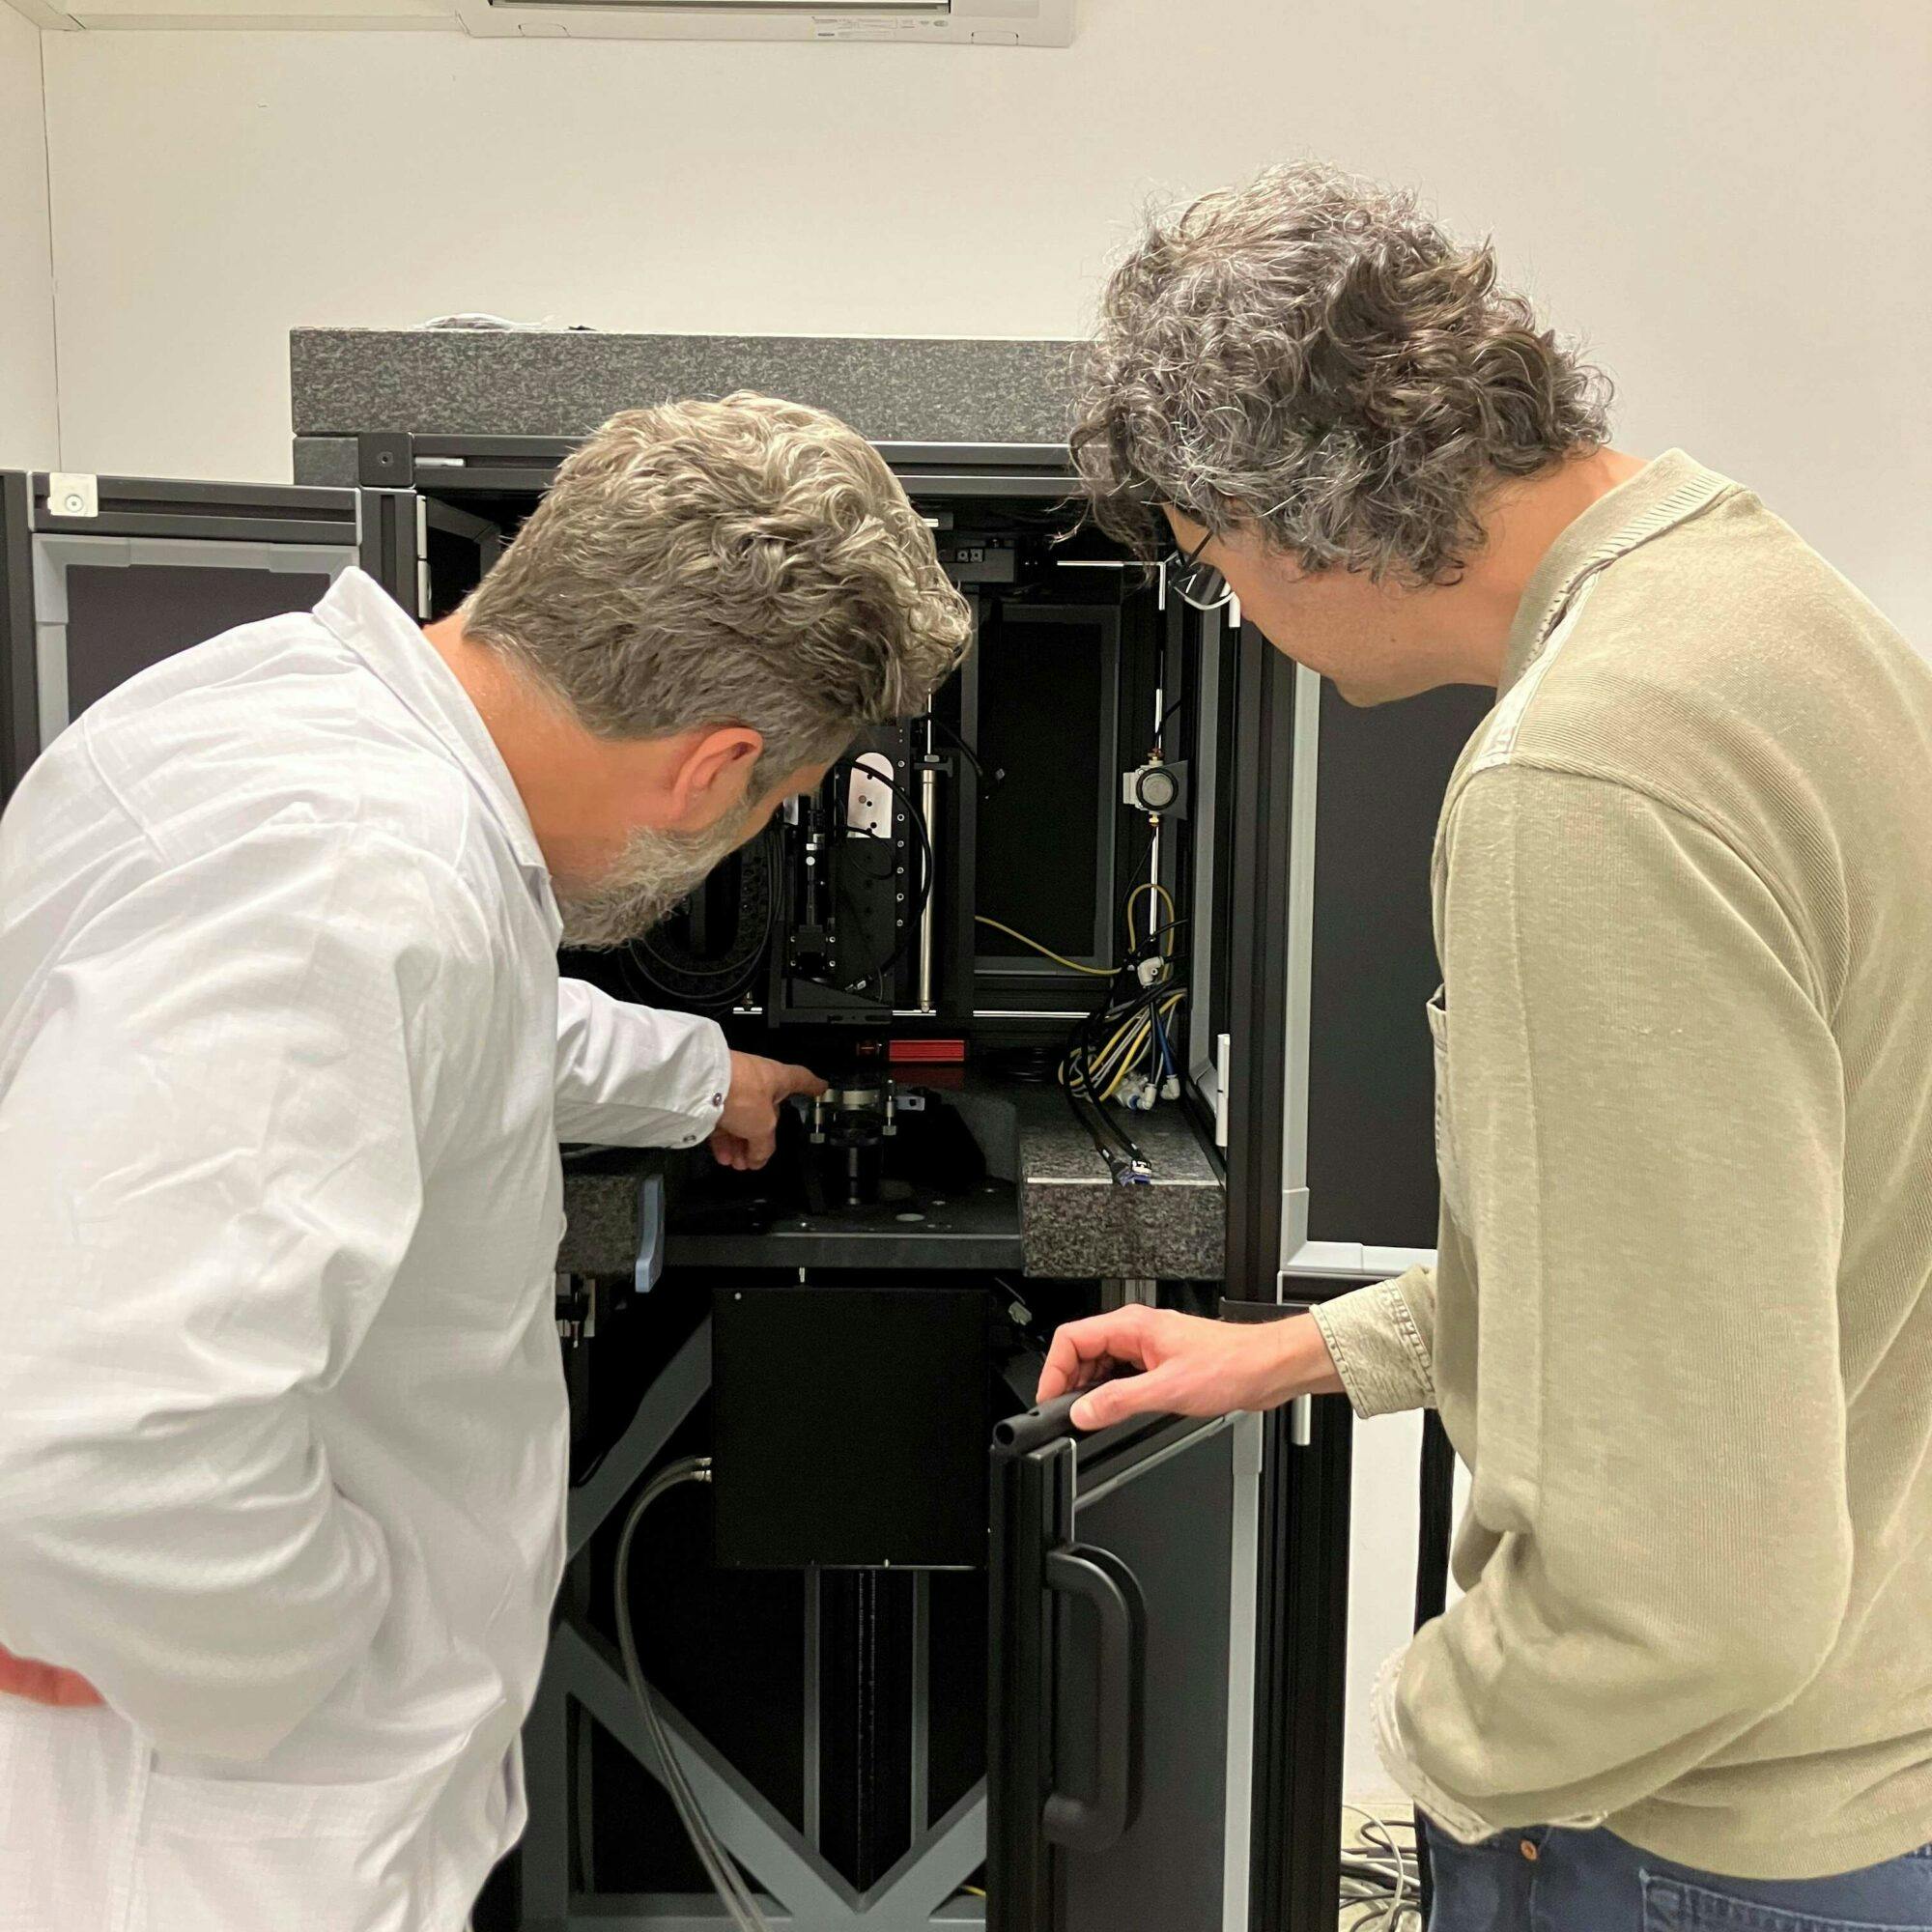 CEO Florian Zangerl and Dr. Dario Bressan looking at In-Vision's Ligth Engine